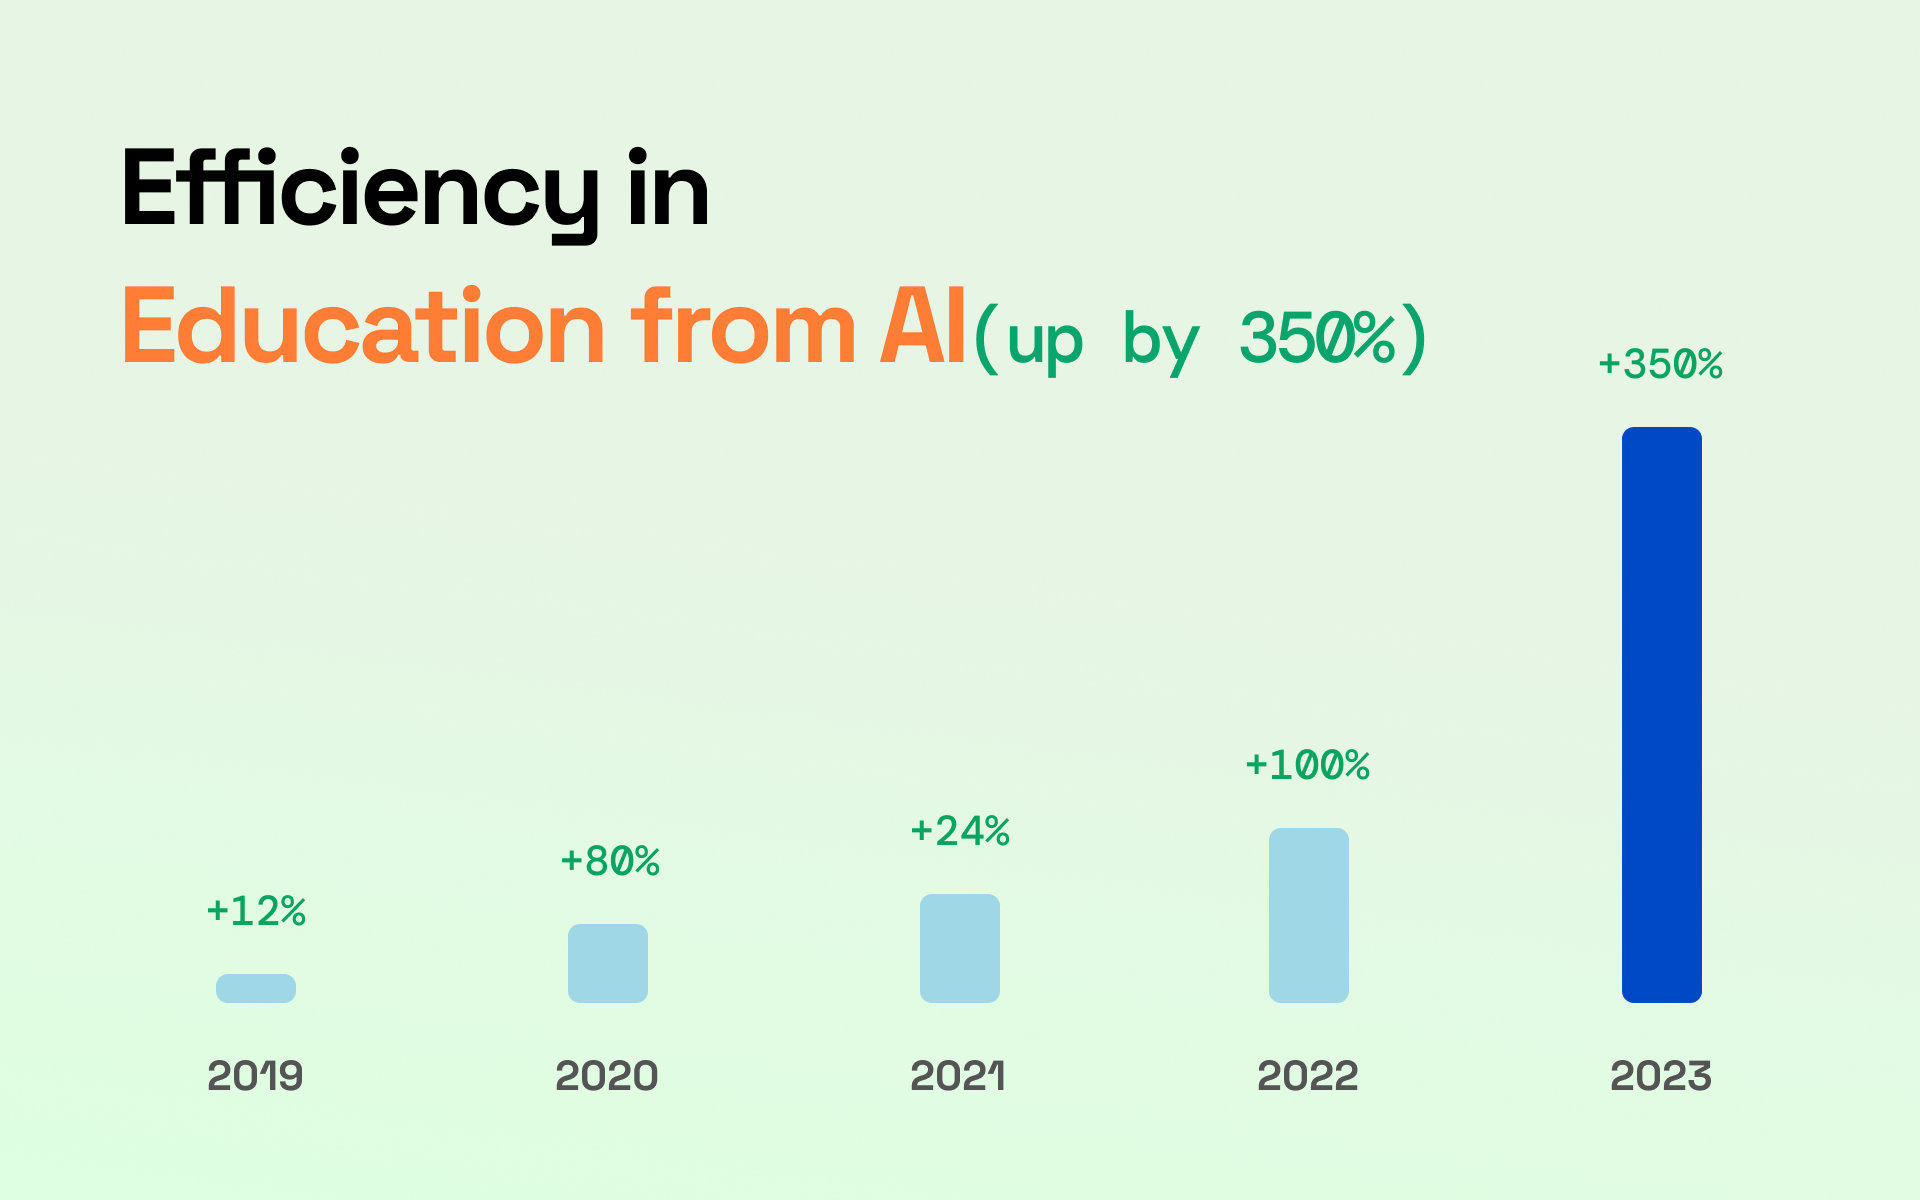 Efficiency in education using AI is up by 350%